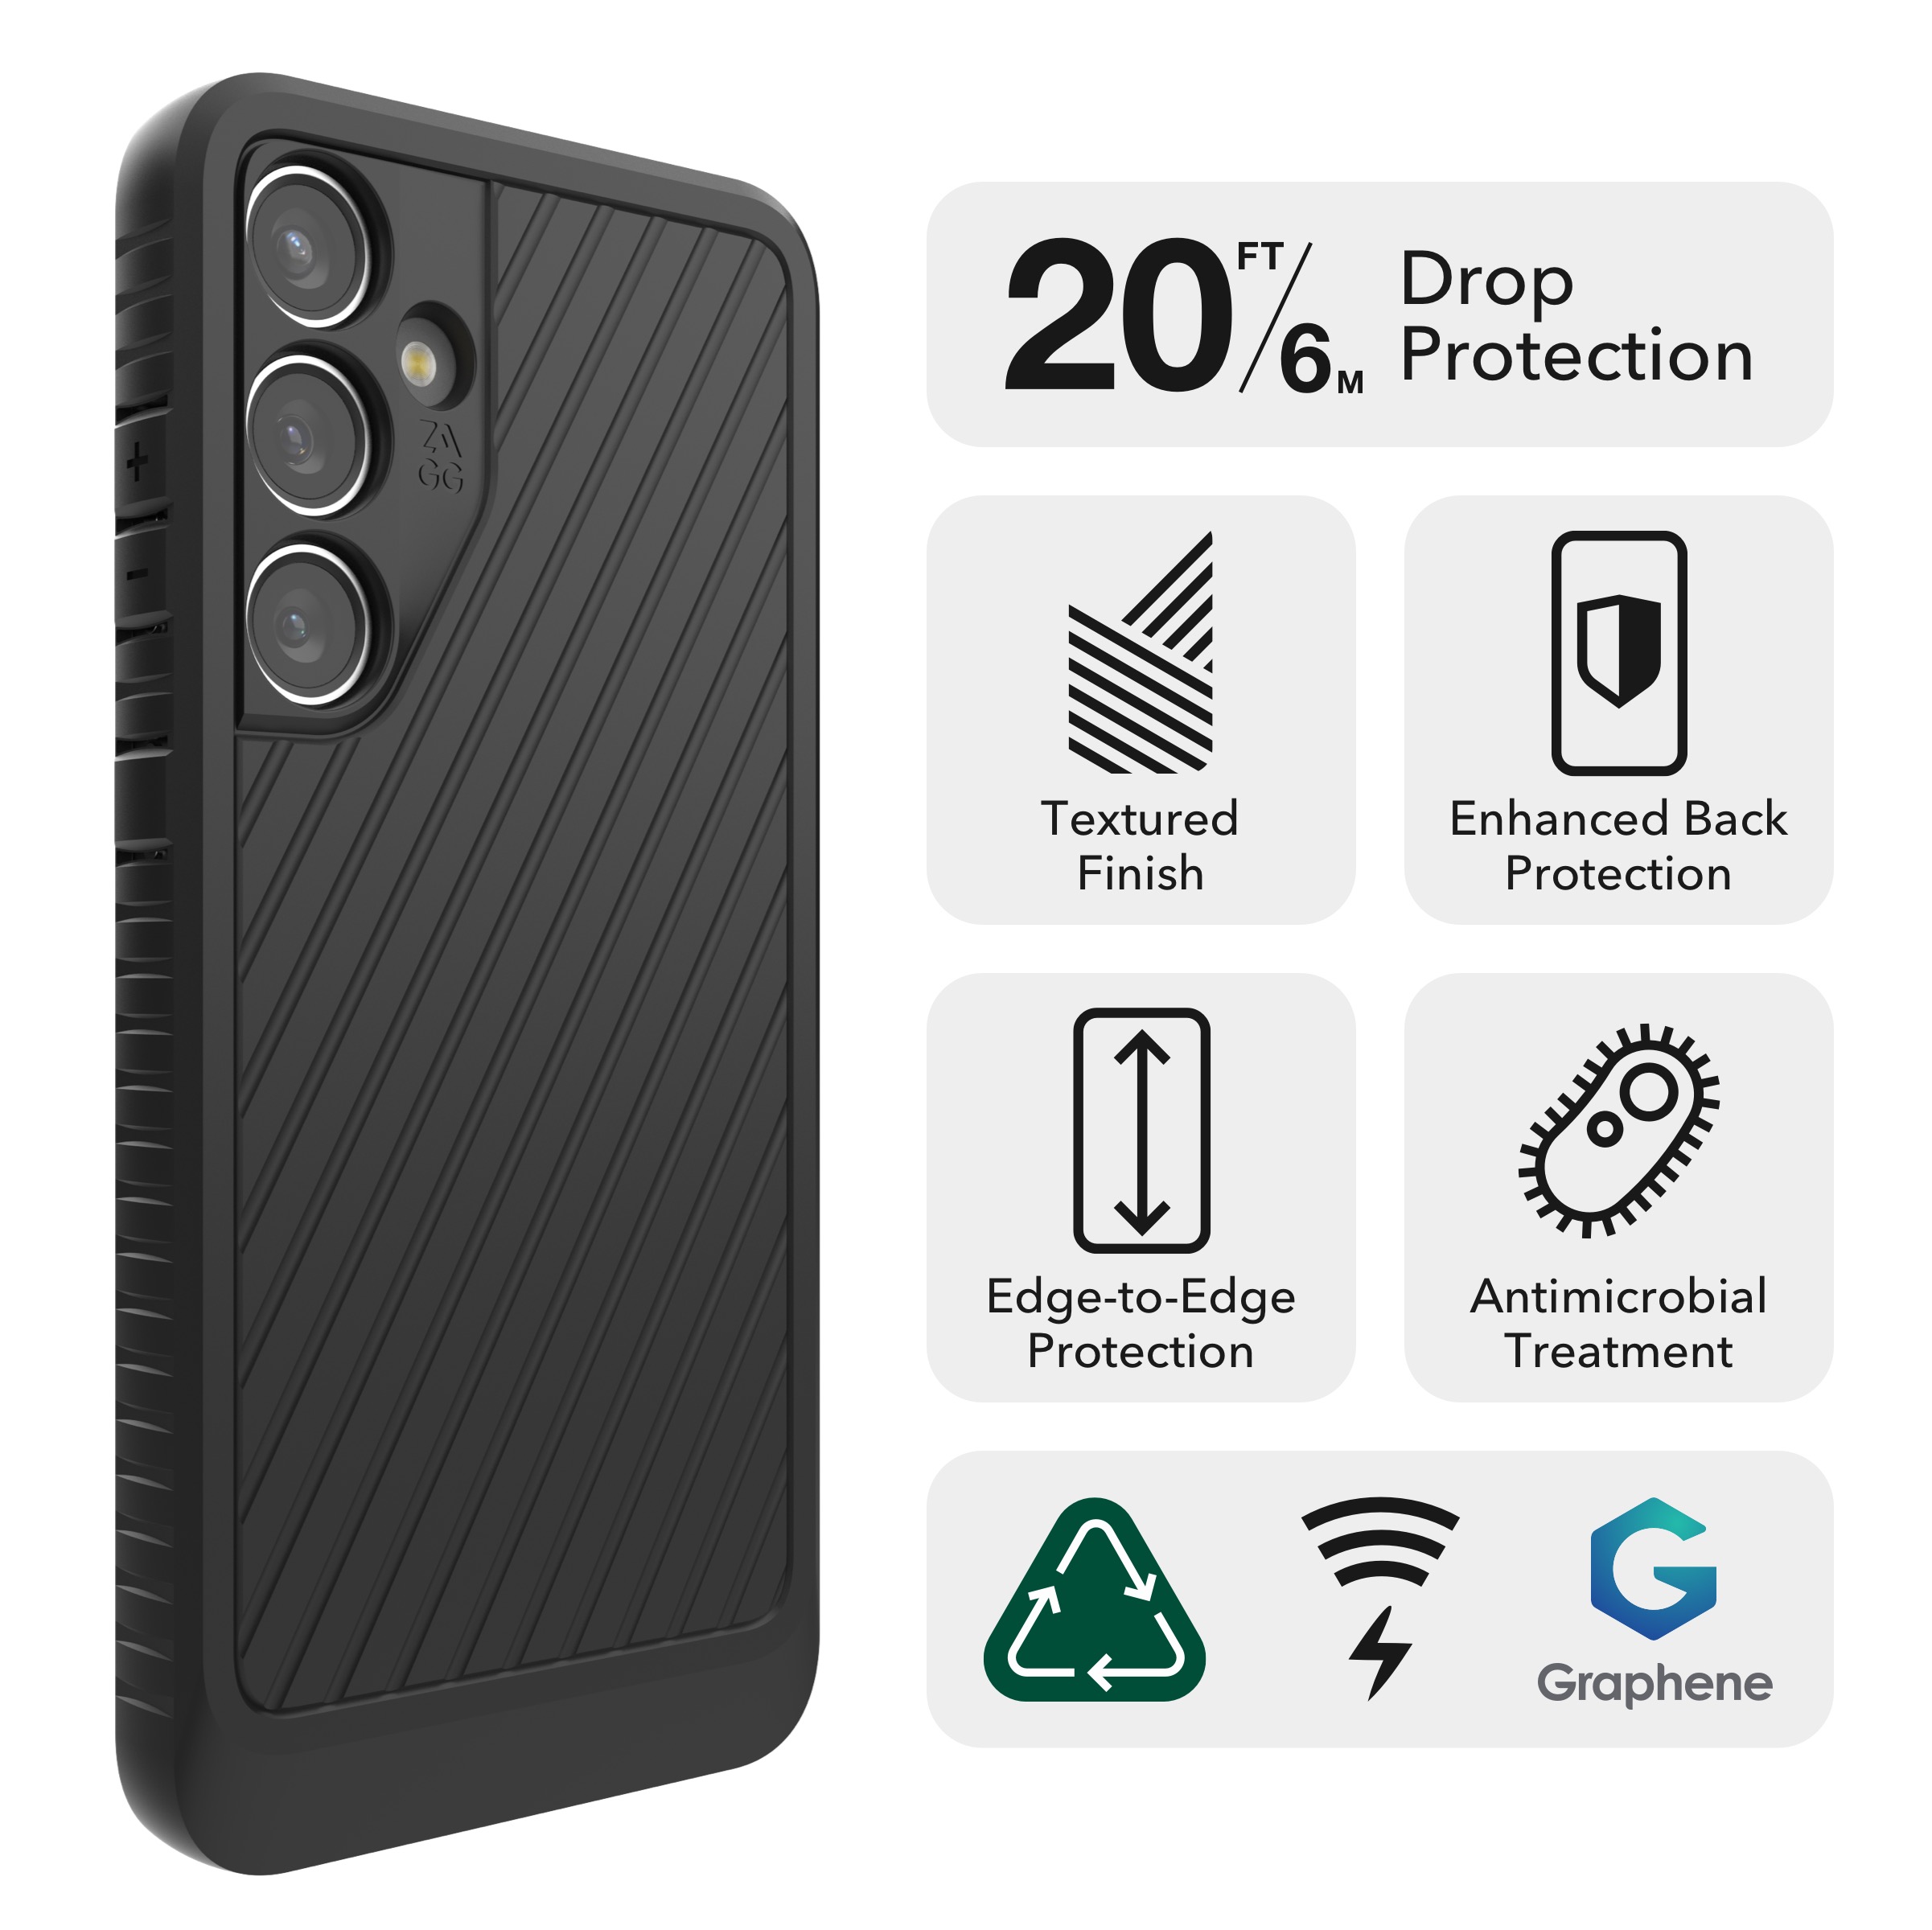 Drop Resistant up to 20 ft ǀ 6m ||
Everest protects your phone from drops up to 20 feet (6 meters).(1)